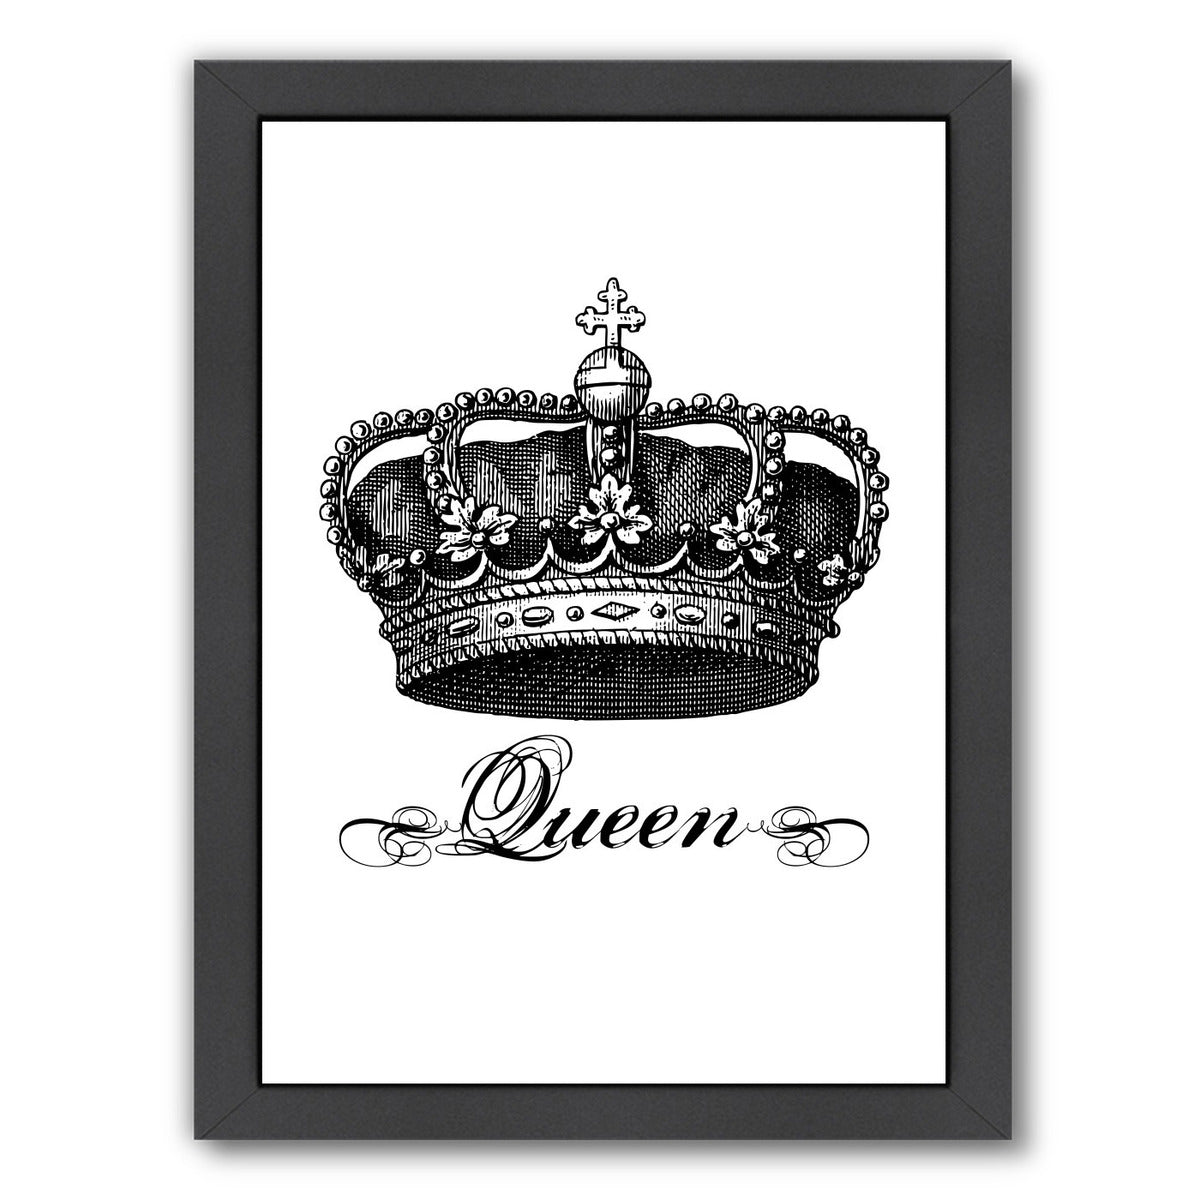 Crown Queen by Amy Brinkman - Framed Print